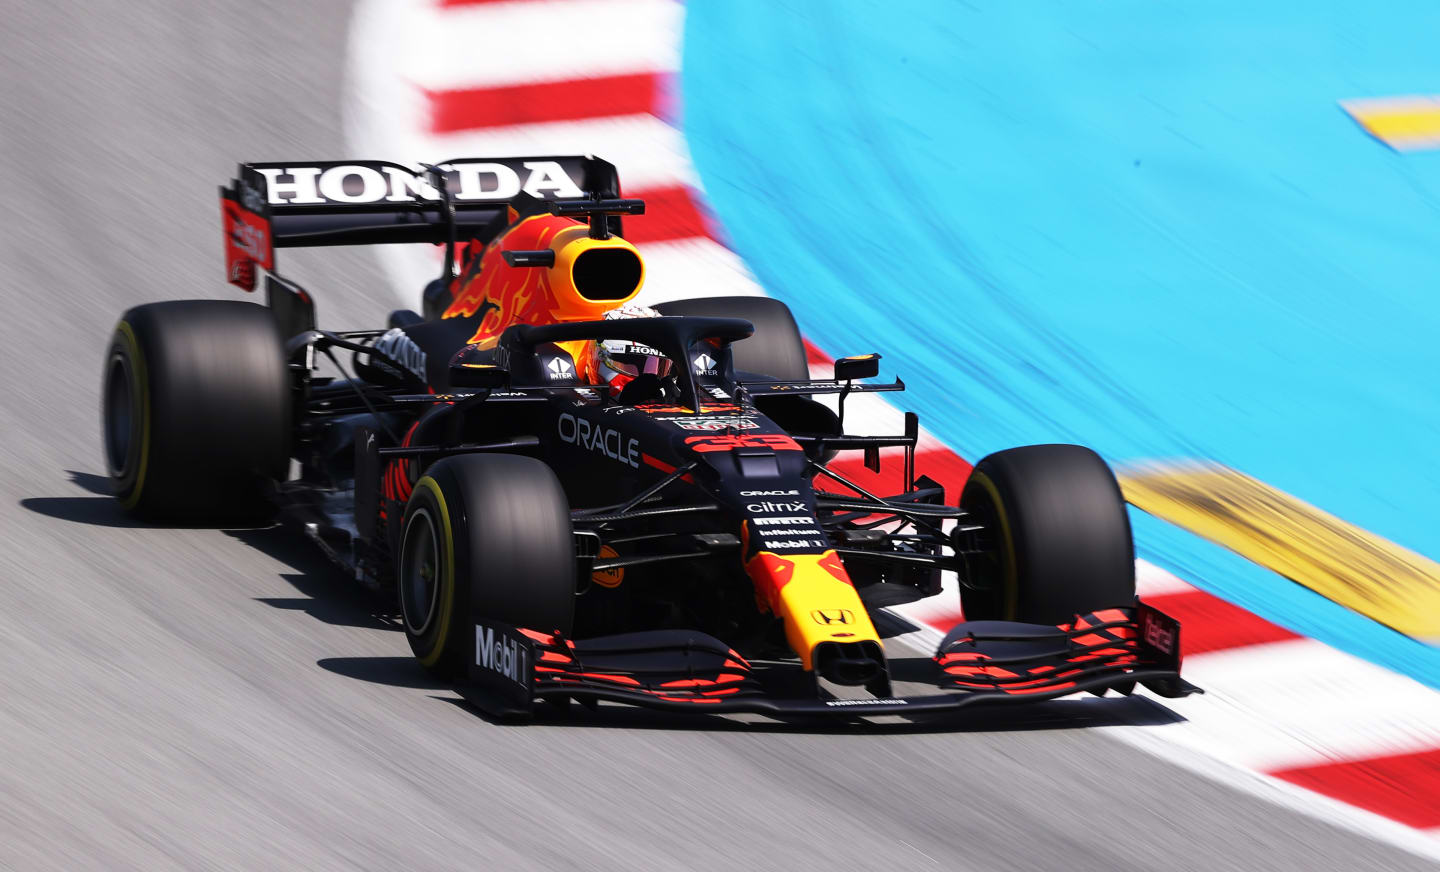 BARCELONA, SPAIN - MAY 07: Max Verstappen of the Netherlands driving the (33) Red Bull Racing RB16B